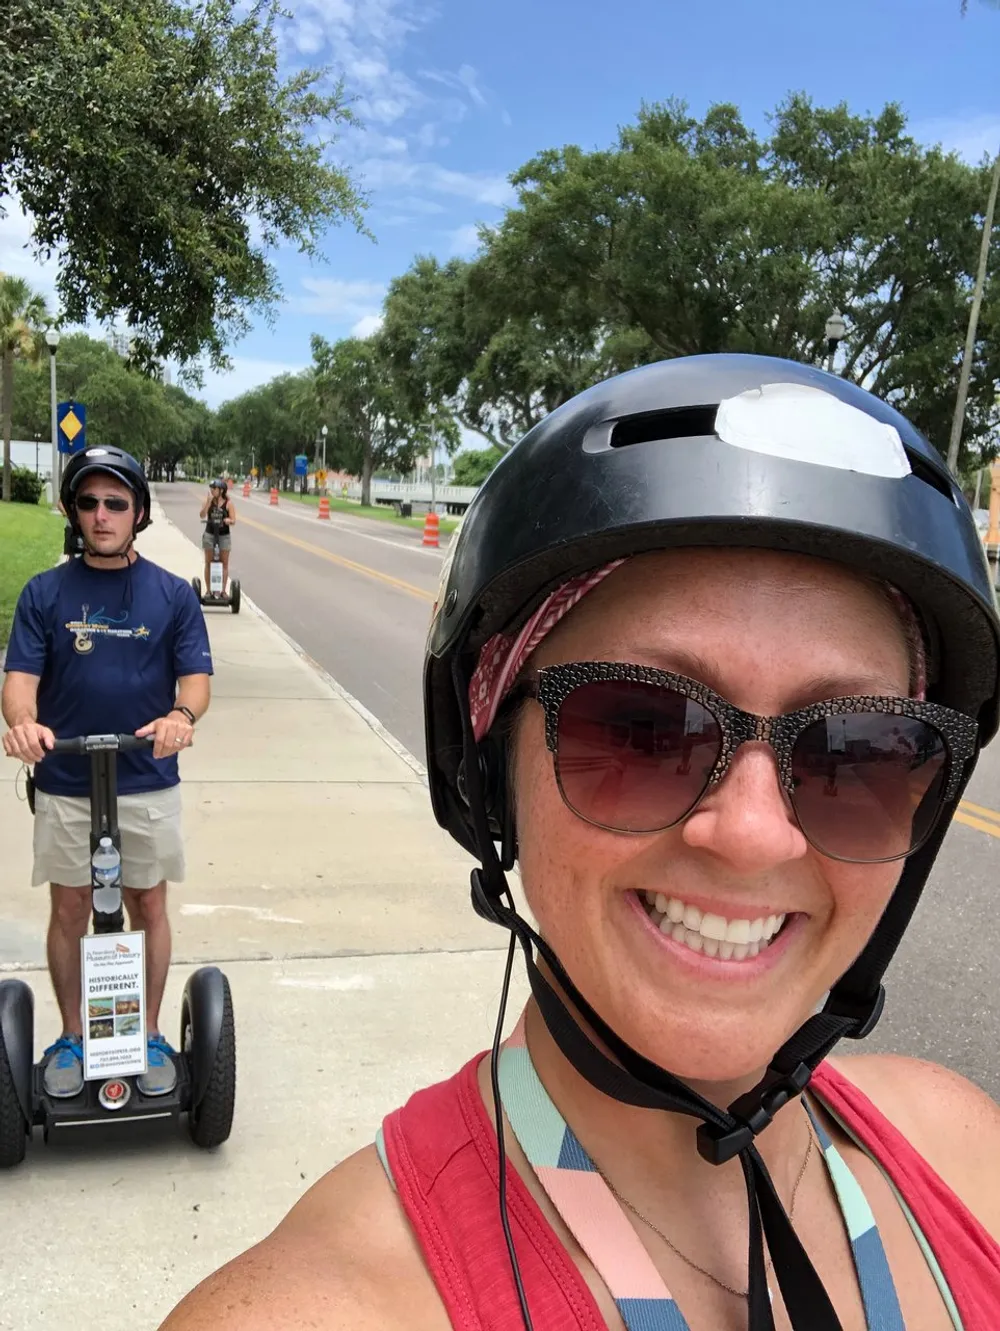 A person is taking a selfie while wearing a helmet smiling with another person riding a Segway in the background